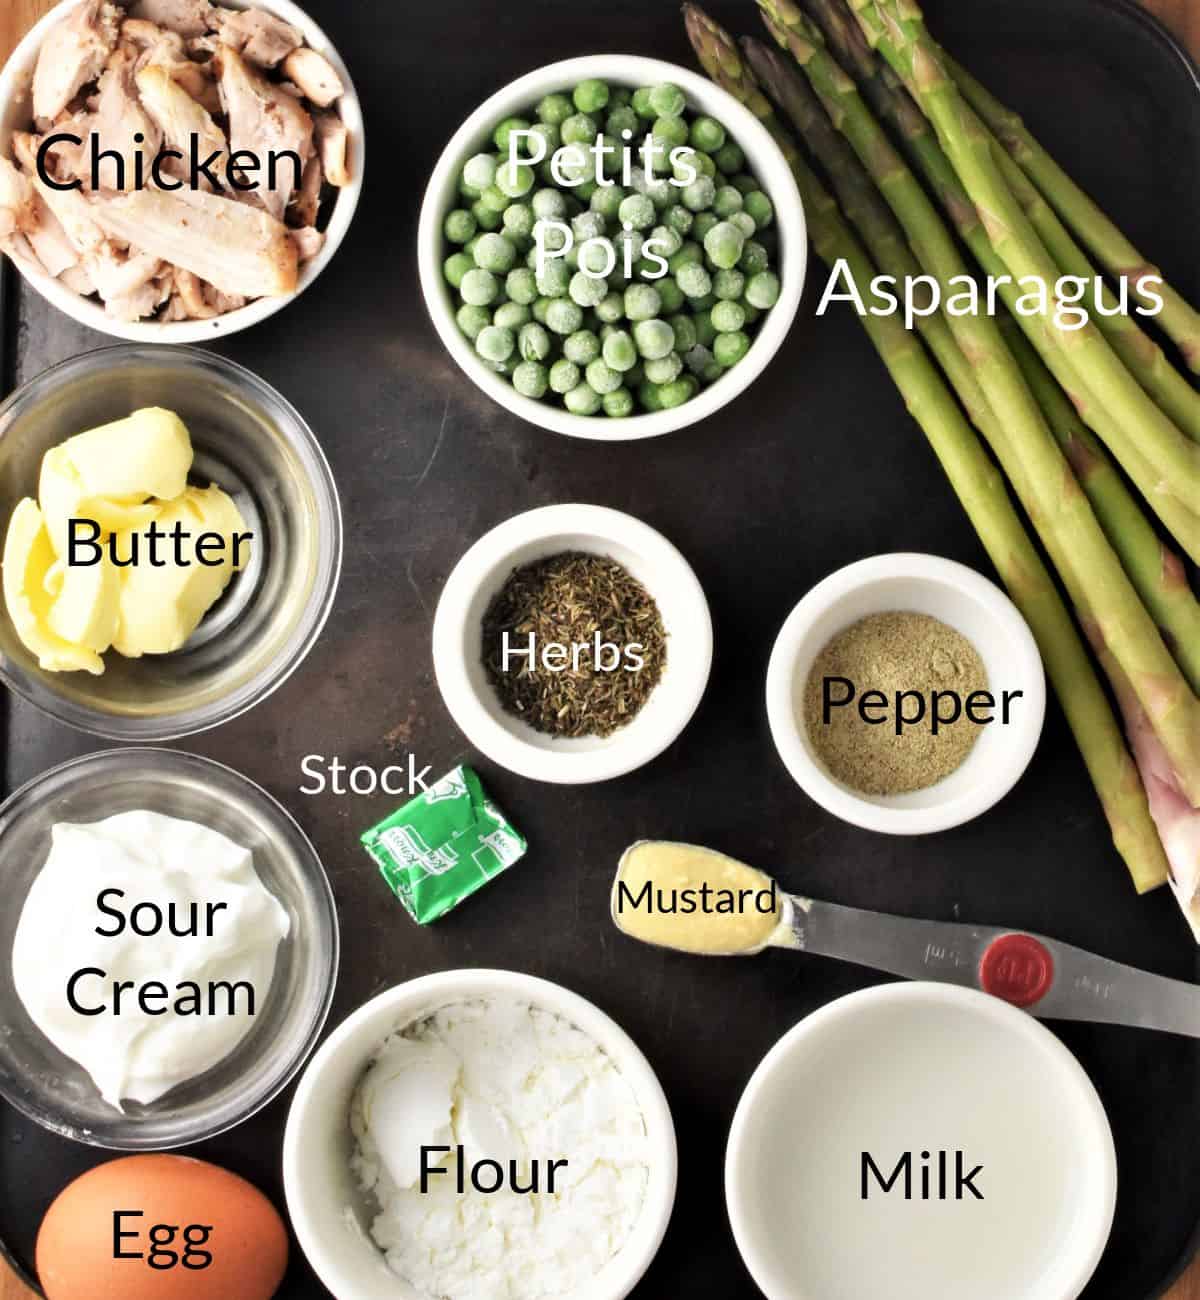 Ingredients for making chicken and asparagus pies in individual dishes.